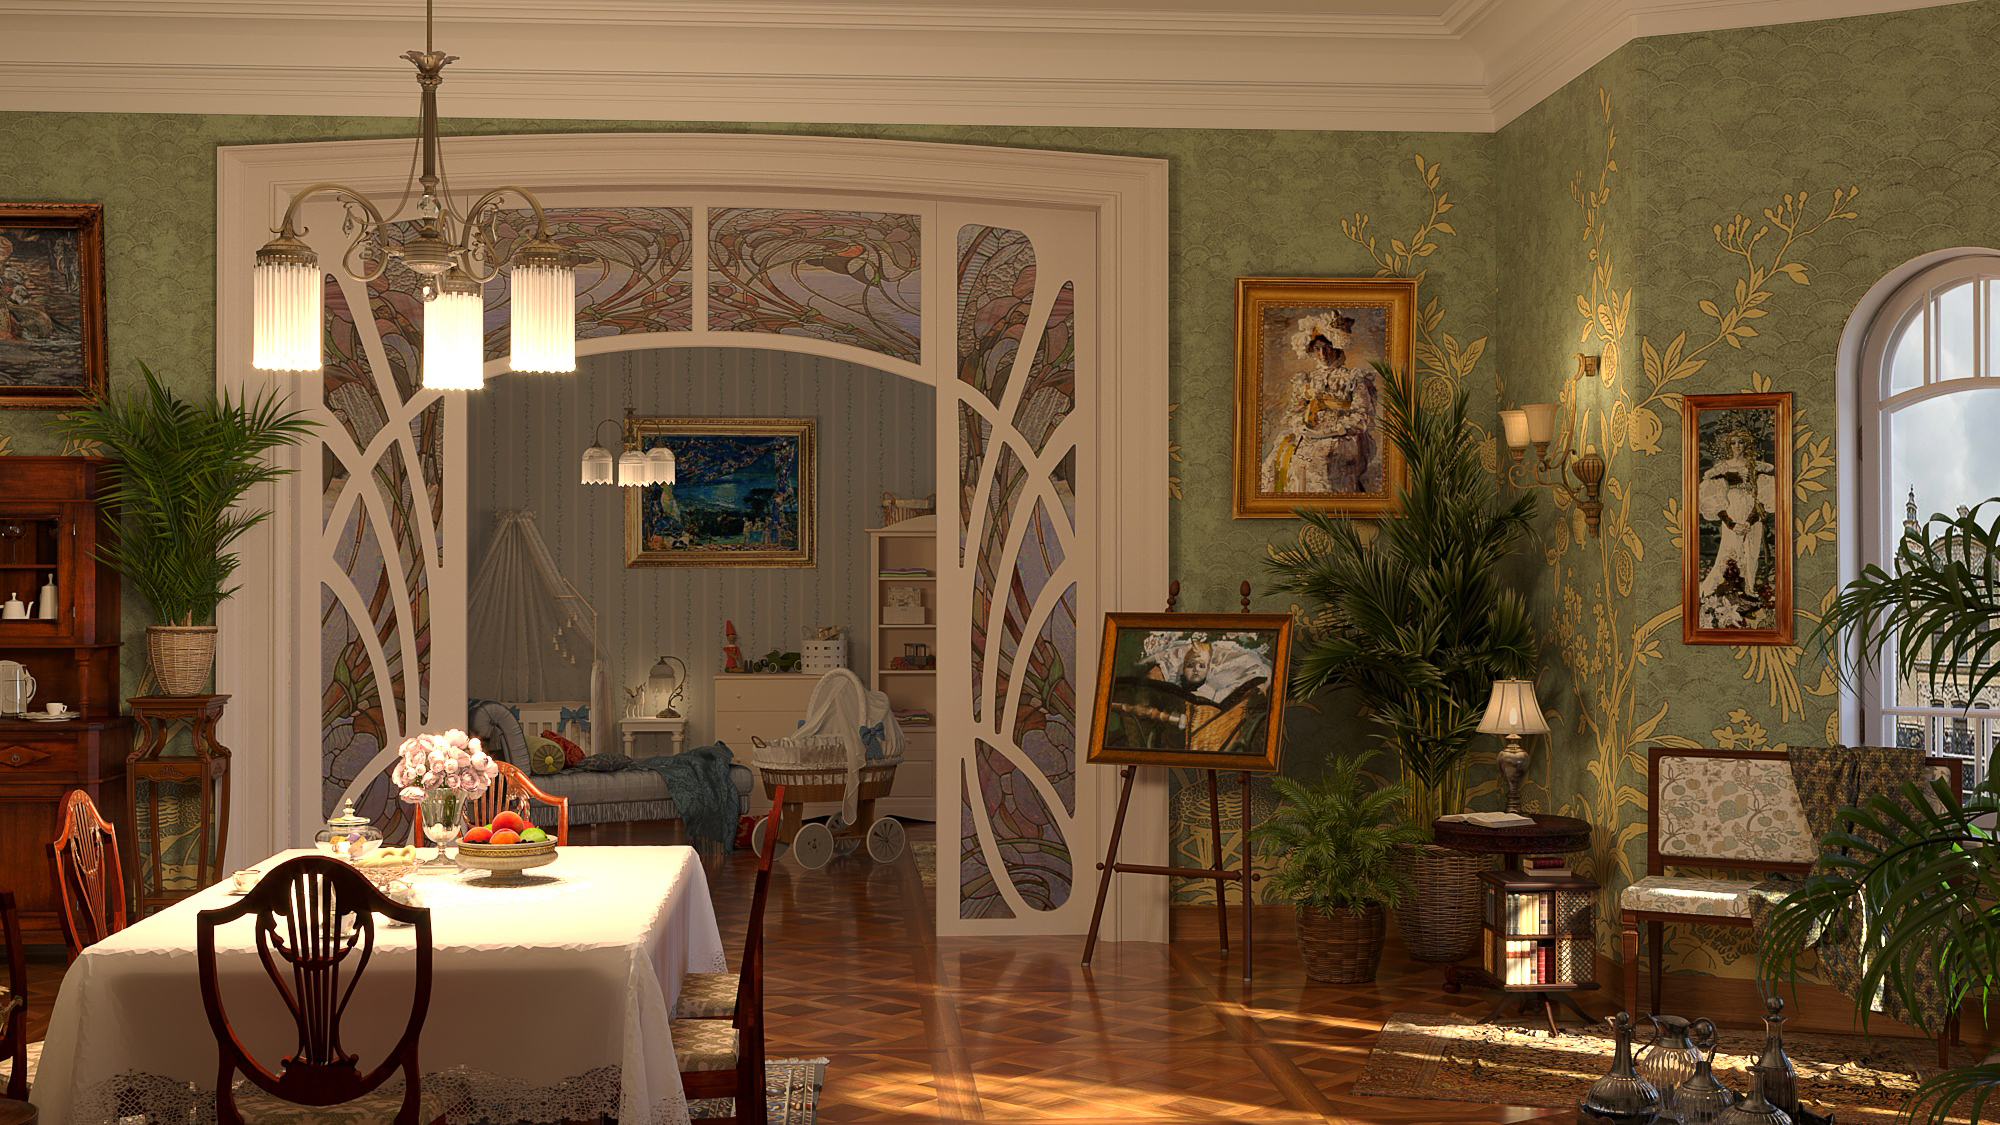 Sketch of the scenery "Vrubel's apartment" in 3d max corona render image